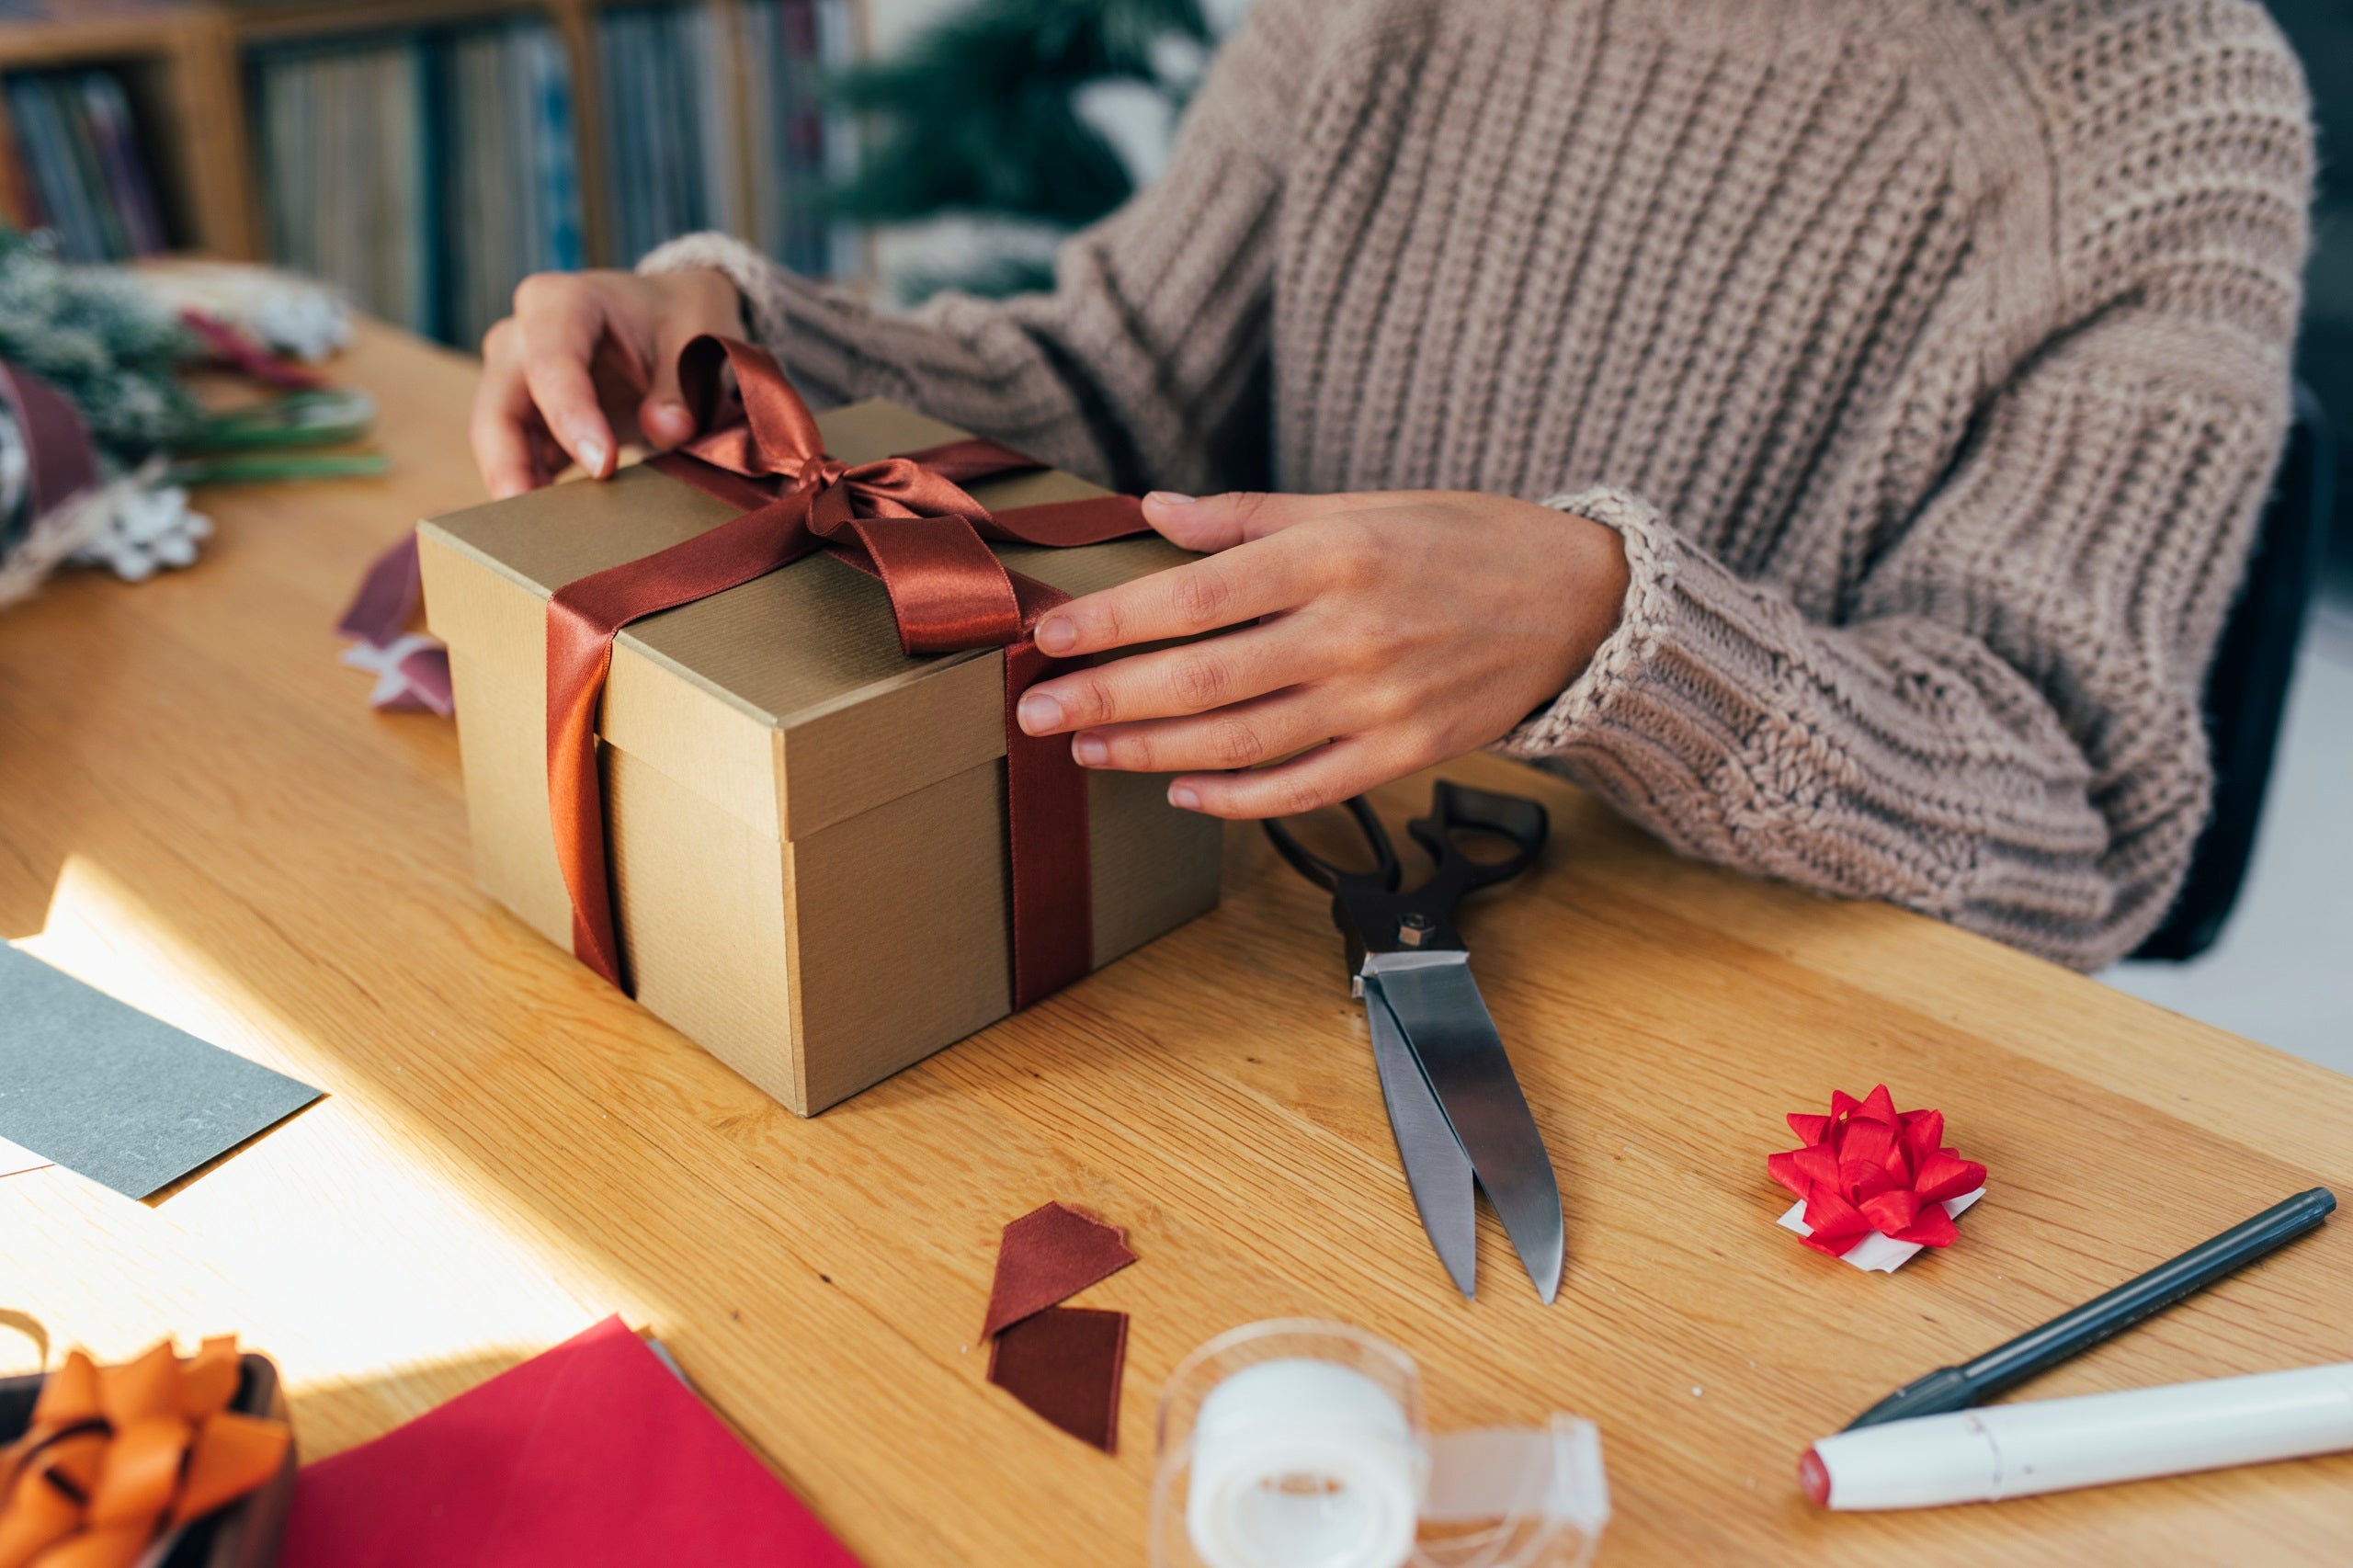 A person wraps a gift box with a bow on top